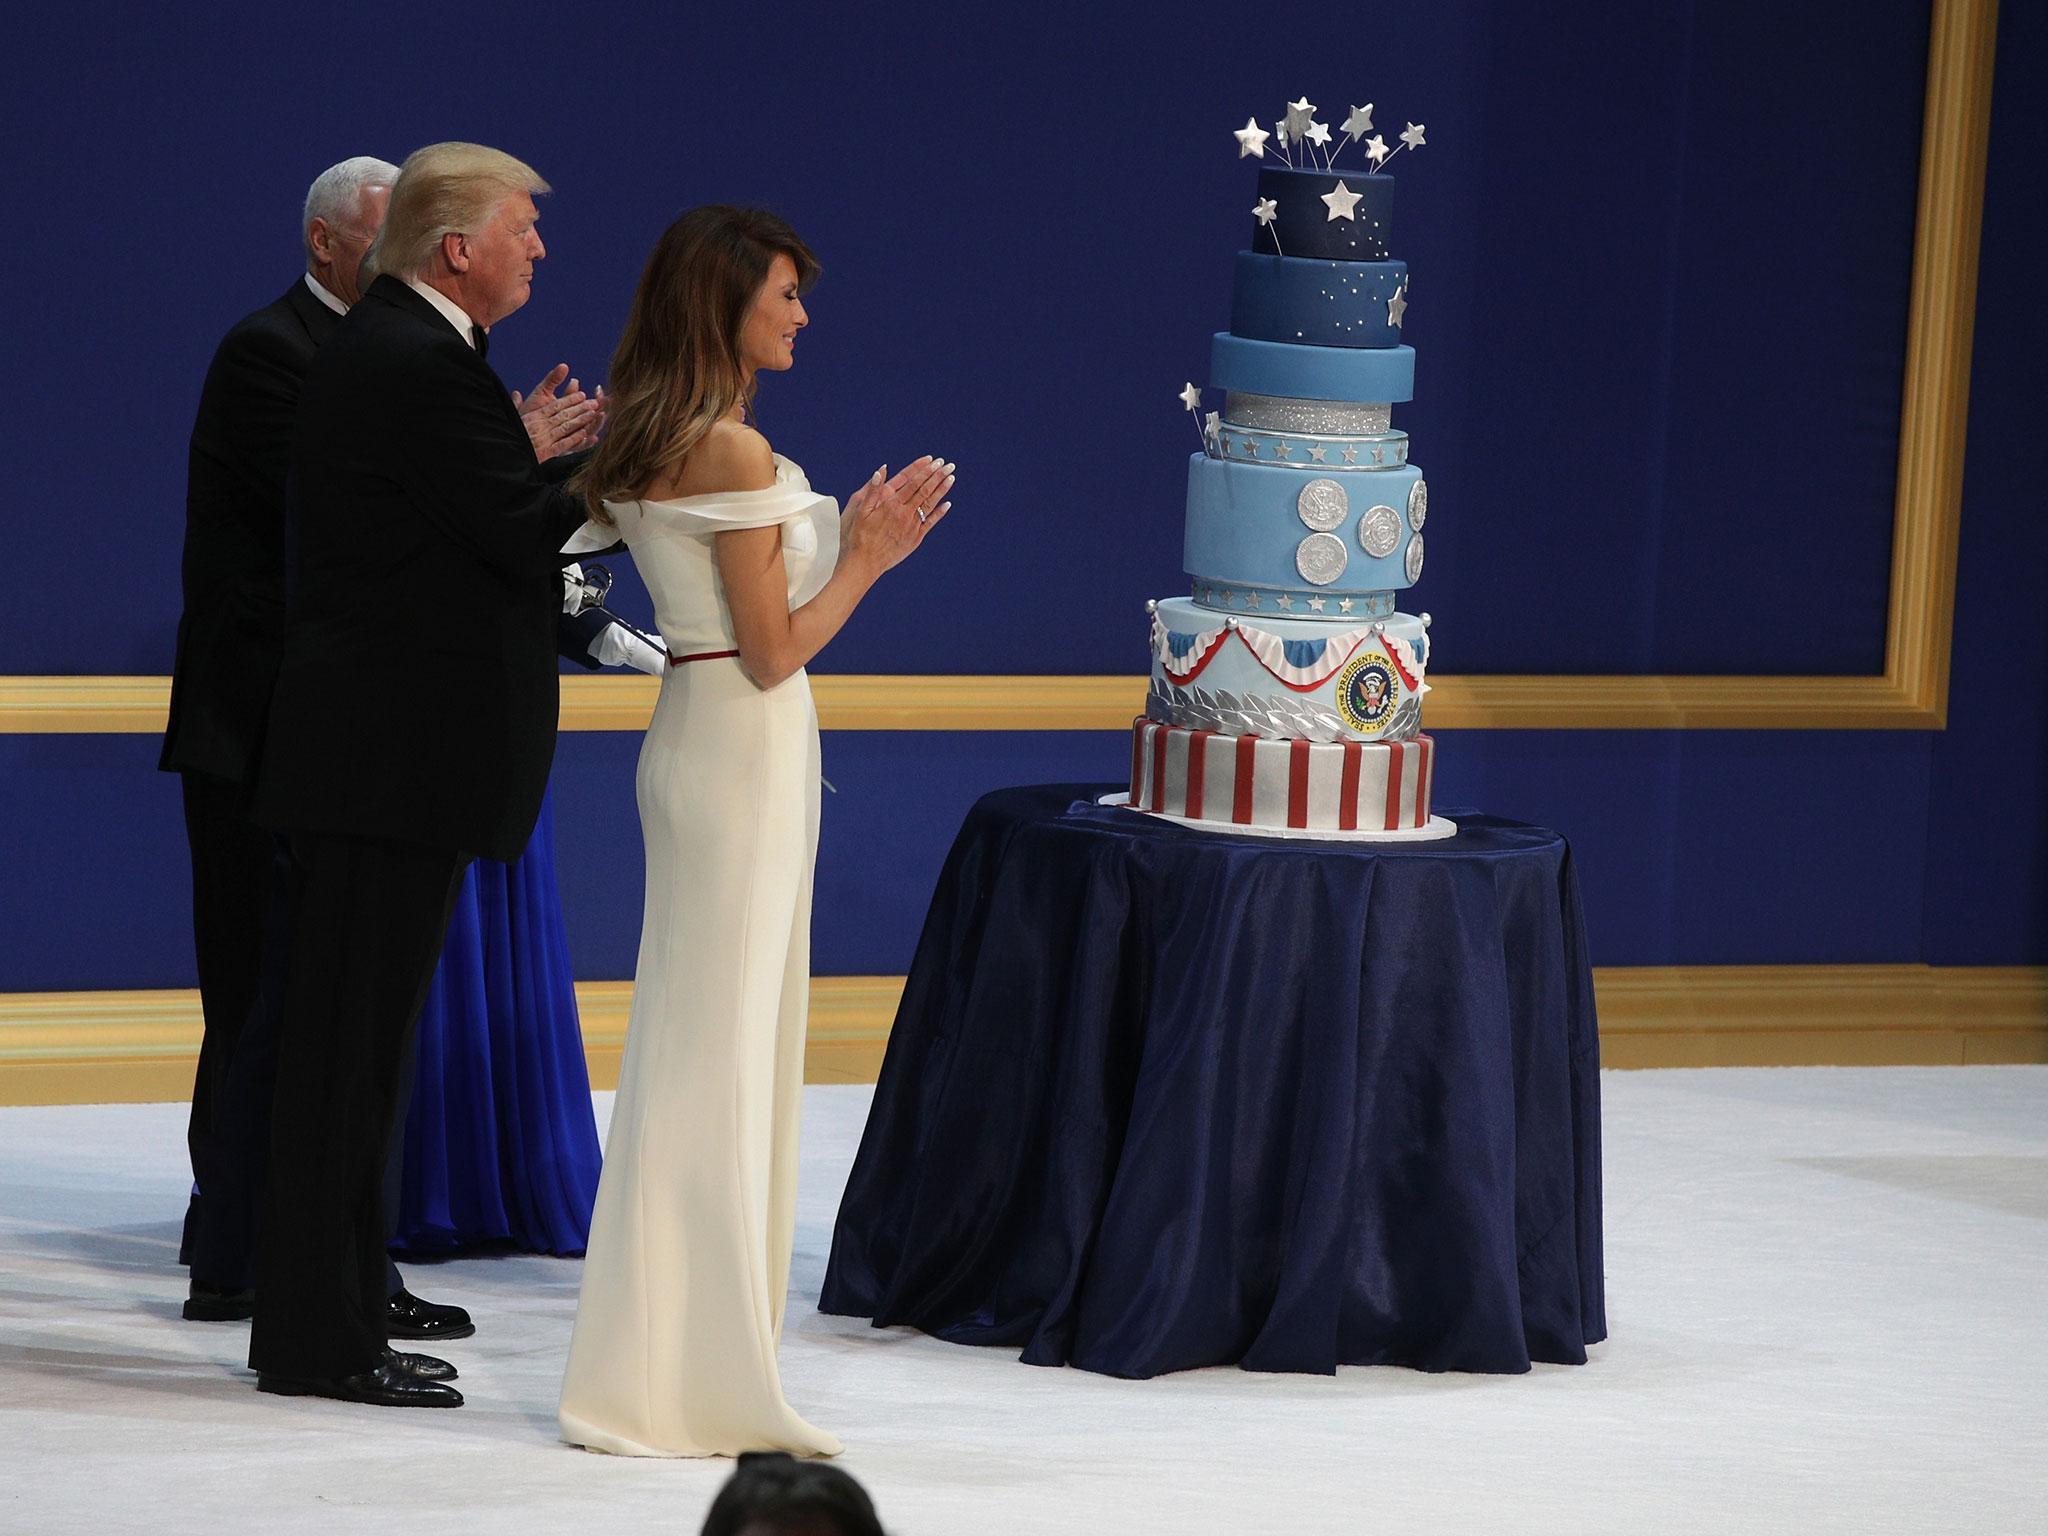 President Donald Trump, Melania Trump, Vice President Mike Pence and Karen Pence clap before cutting the cake during the inaugural ball at the National Building Museum